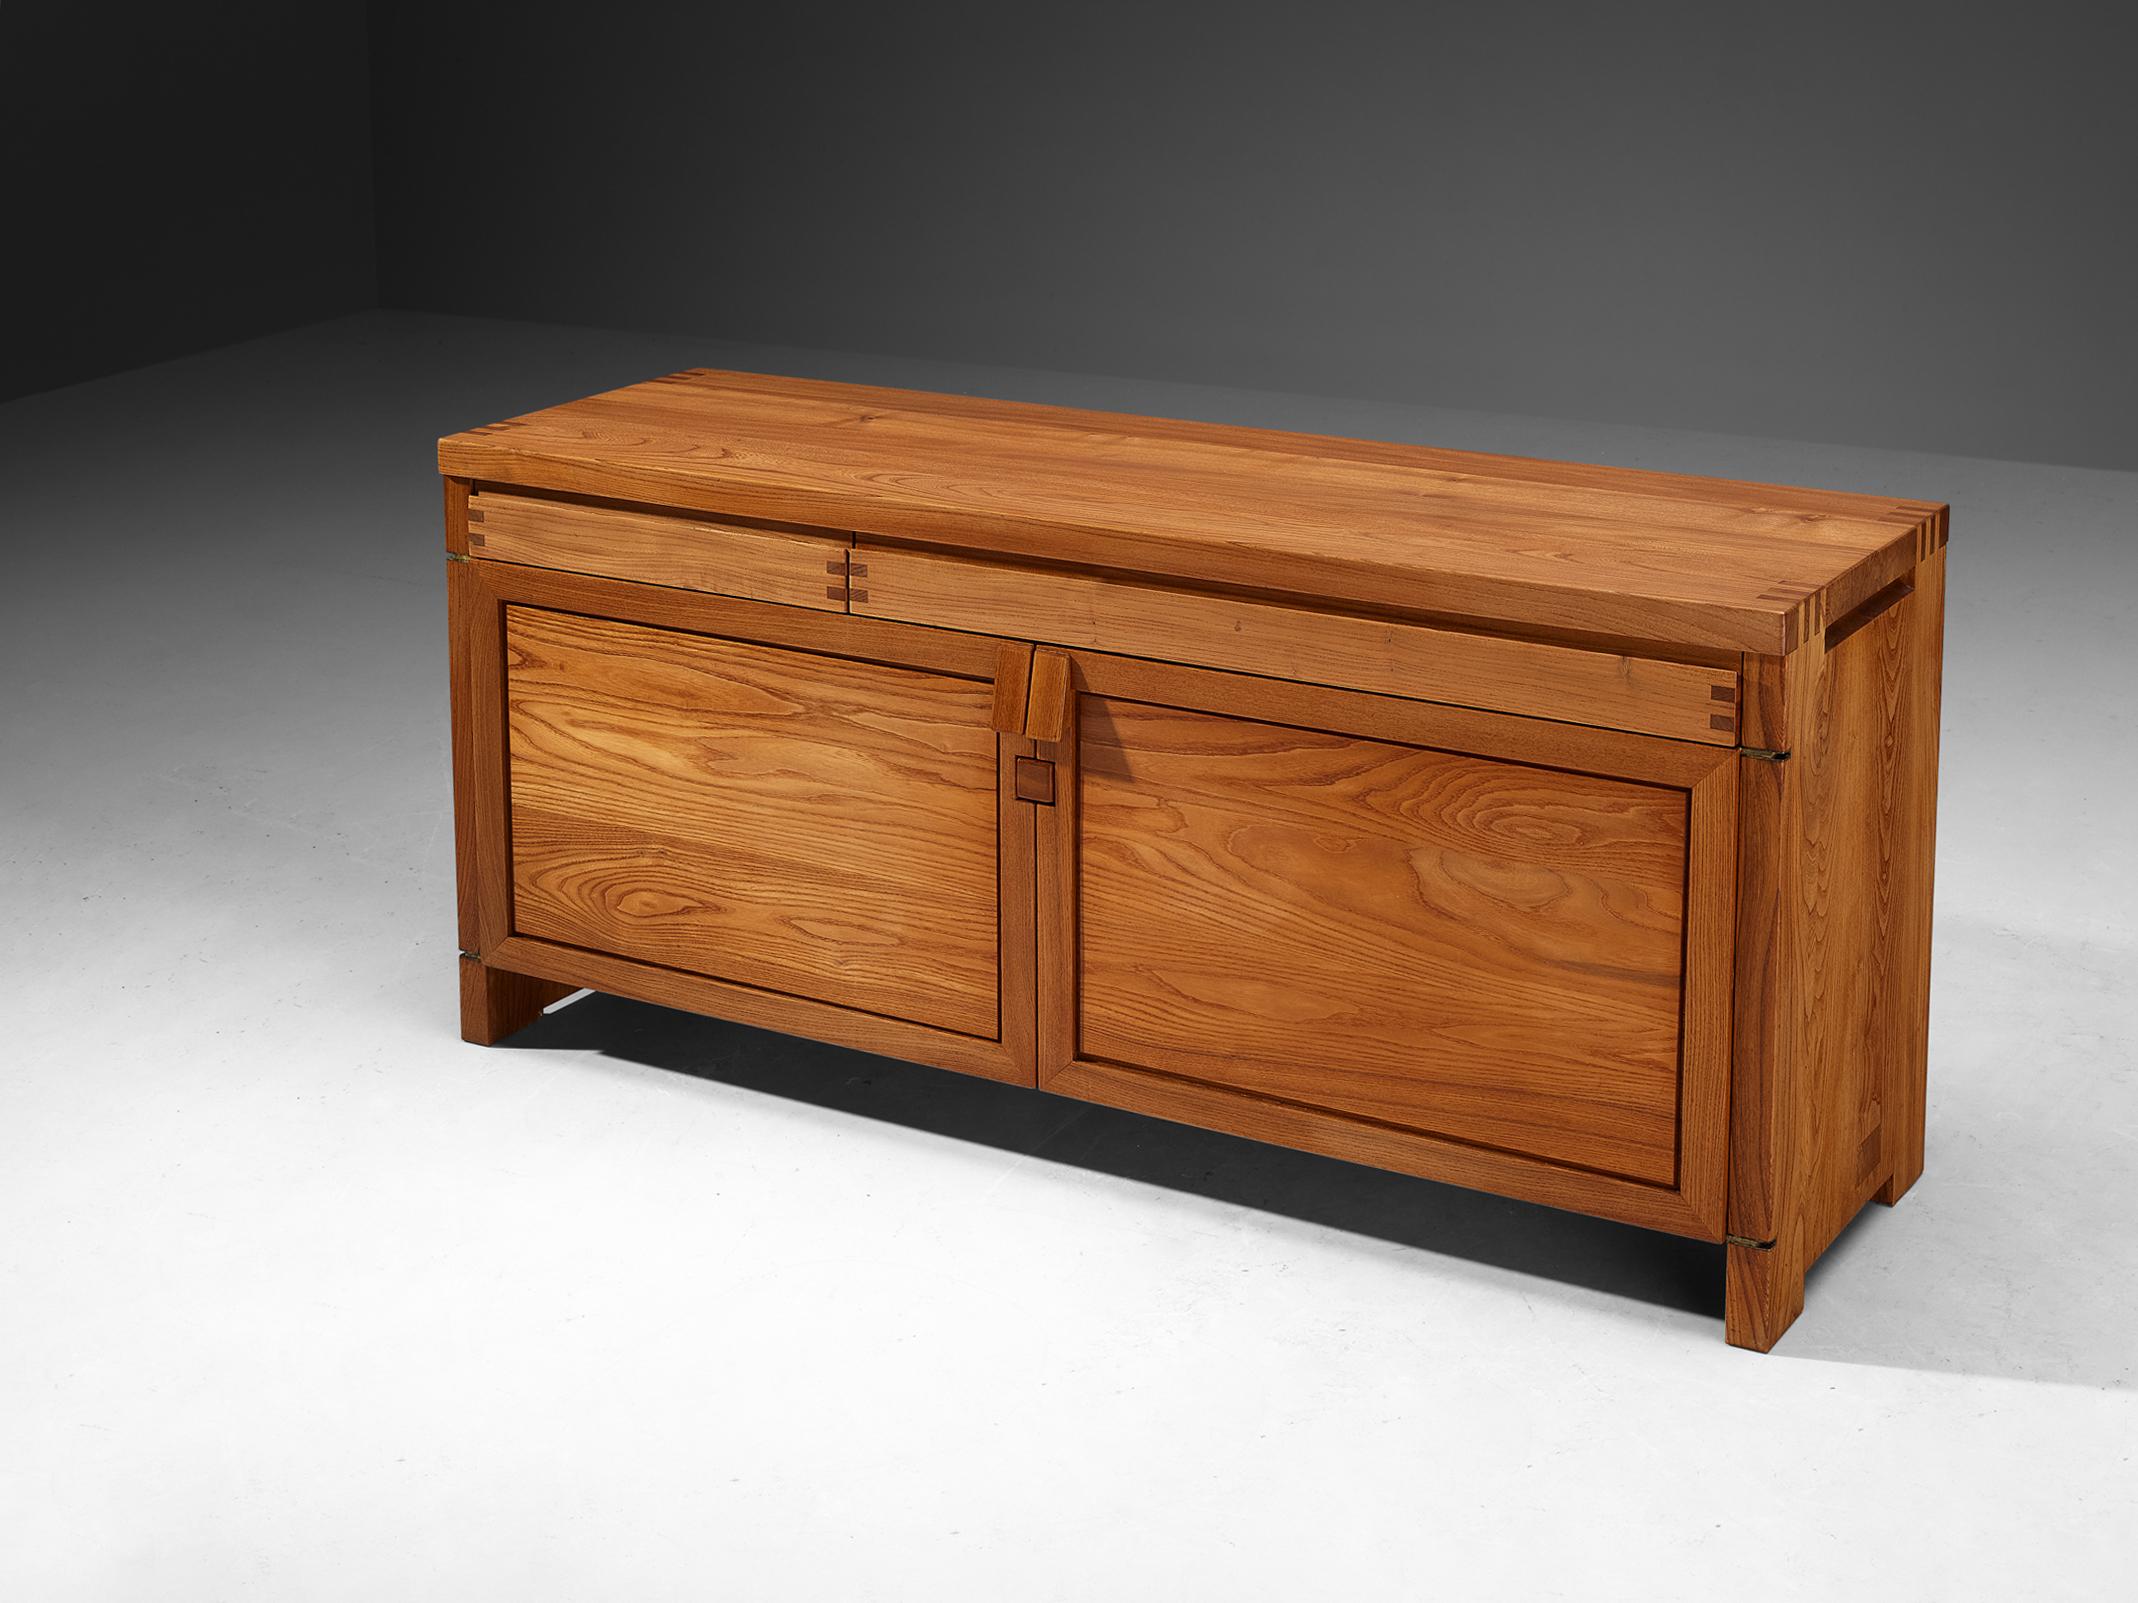 Pierre Chapo, sideboard, model 'R08', elm, France, circa 1964.

This R08 cabinet is one of the early editions designed by Pierre Chapo, known for his hallmark use of solid elmwood and a commitment to pure and clean design and construction